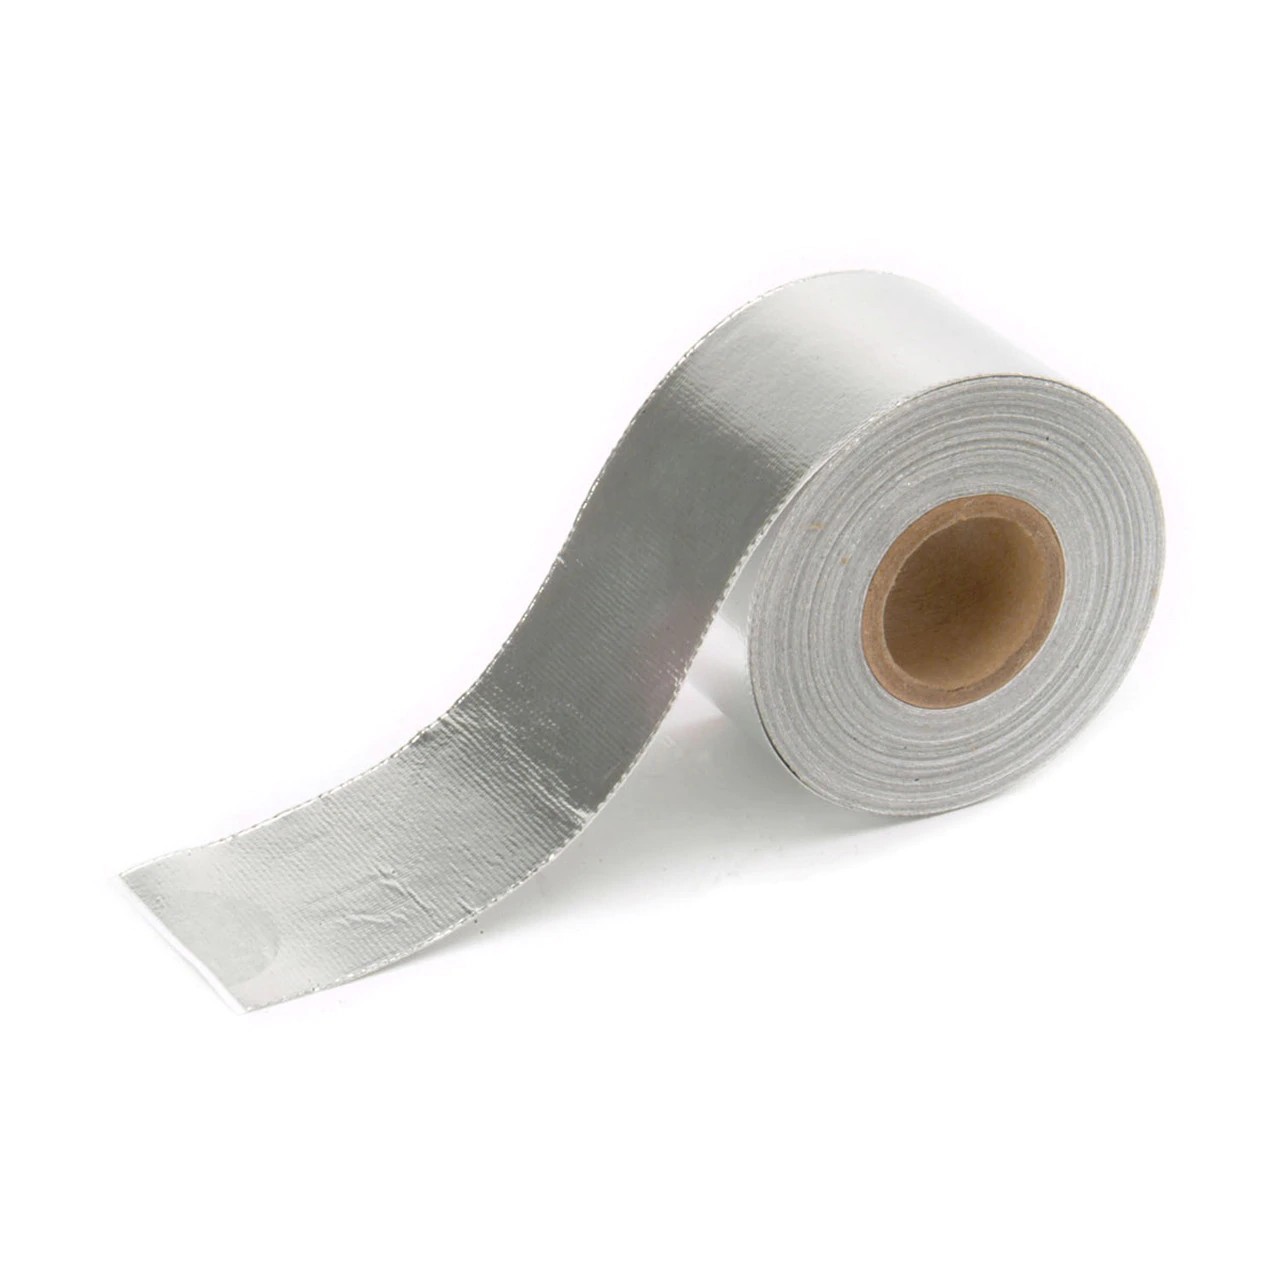 Image of DEI Cool-Tape1 - 1/2 Inch x 30ft roll - 10416